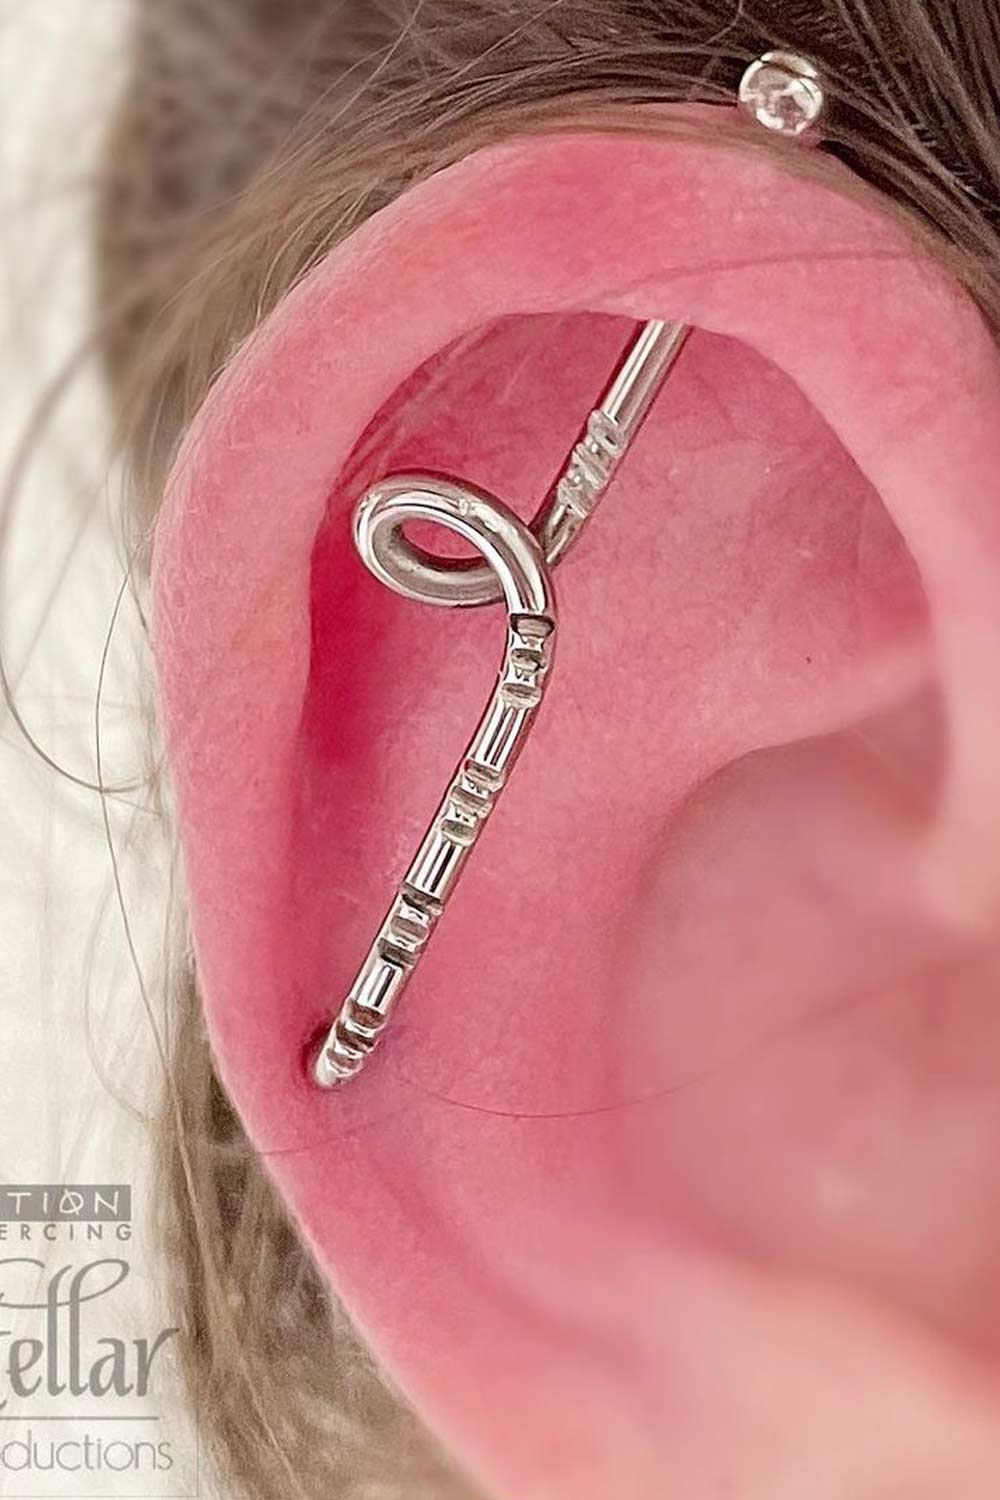 Read Mode About Pain And Healing Of Industrial Piercing